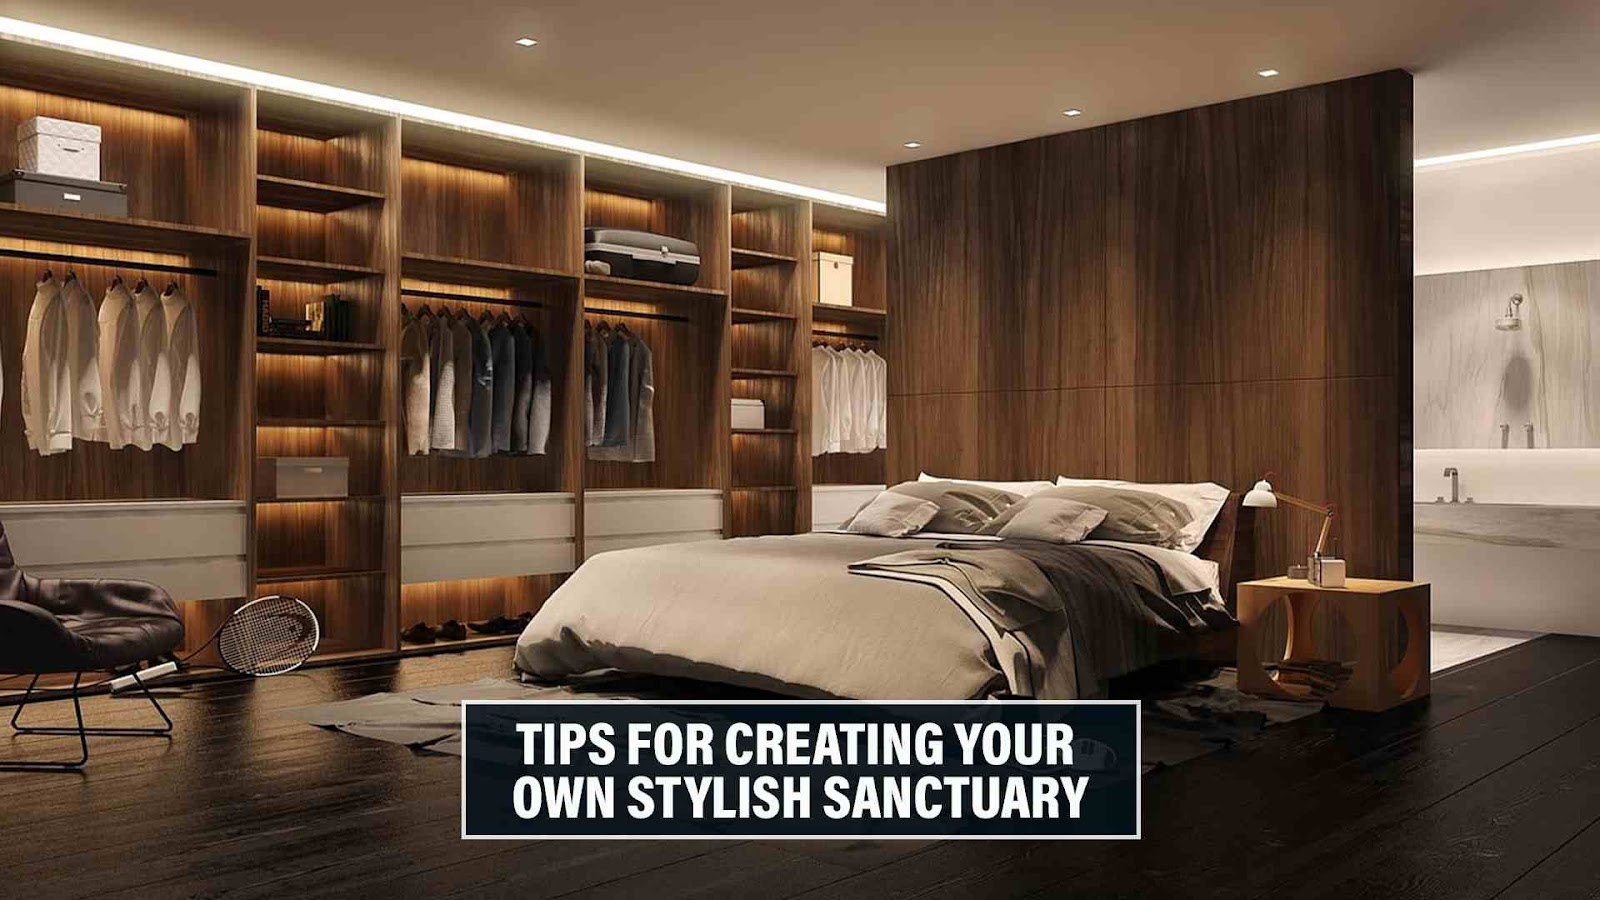 Cool Room Designs: Tips for Creating Your Stylish Sanctuary